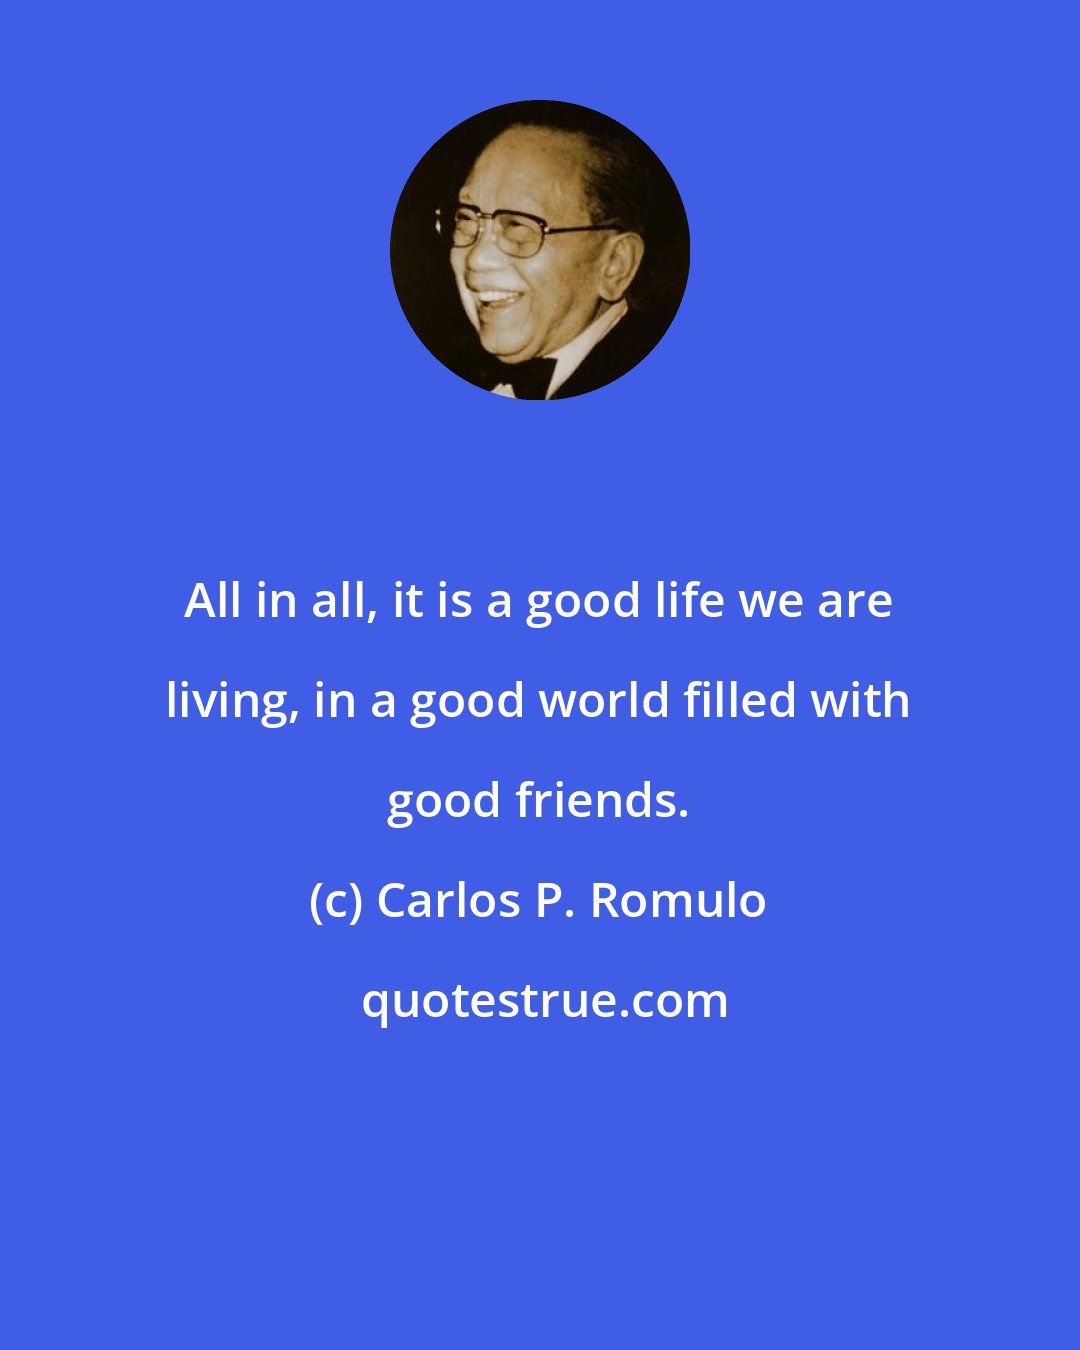 Carlos P. Romulo: All in all, it is a good life we are living, in a good world filled with good friends.